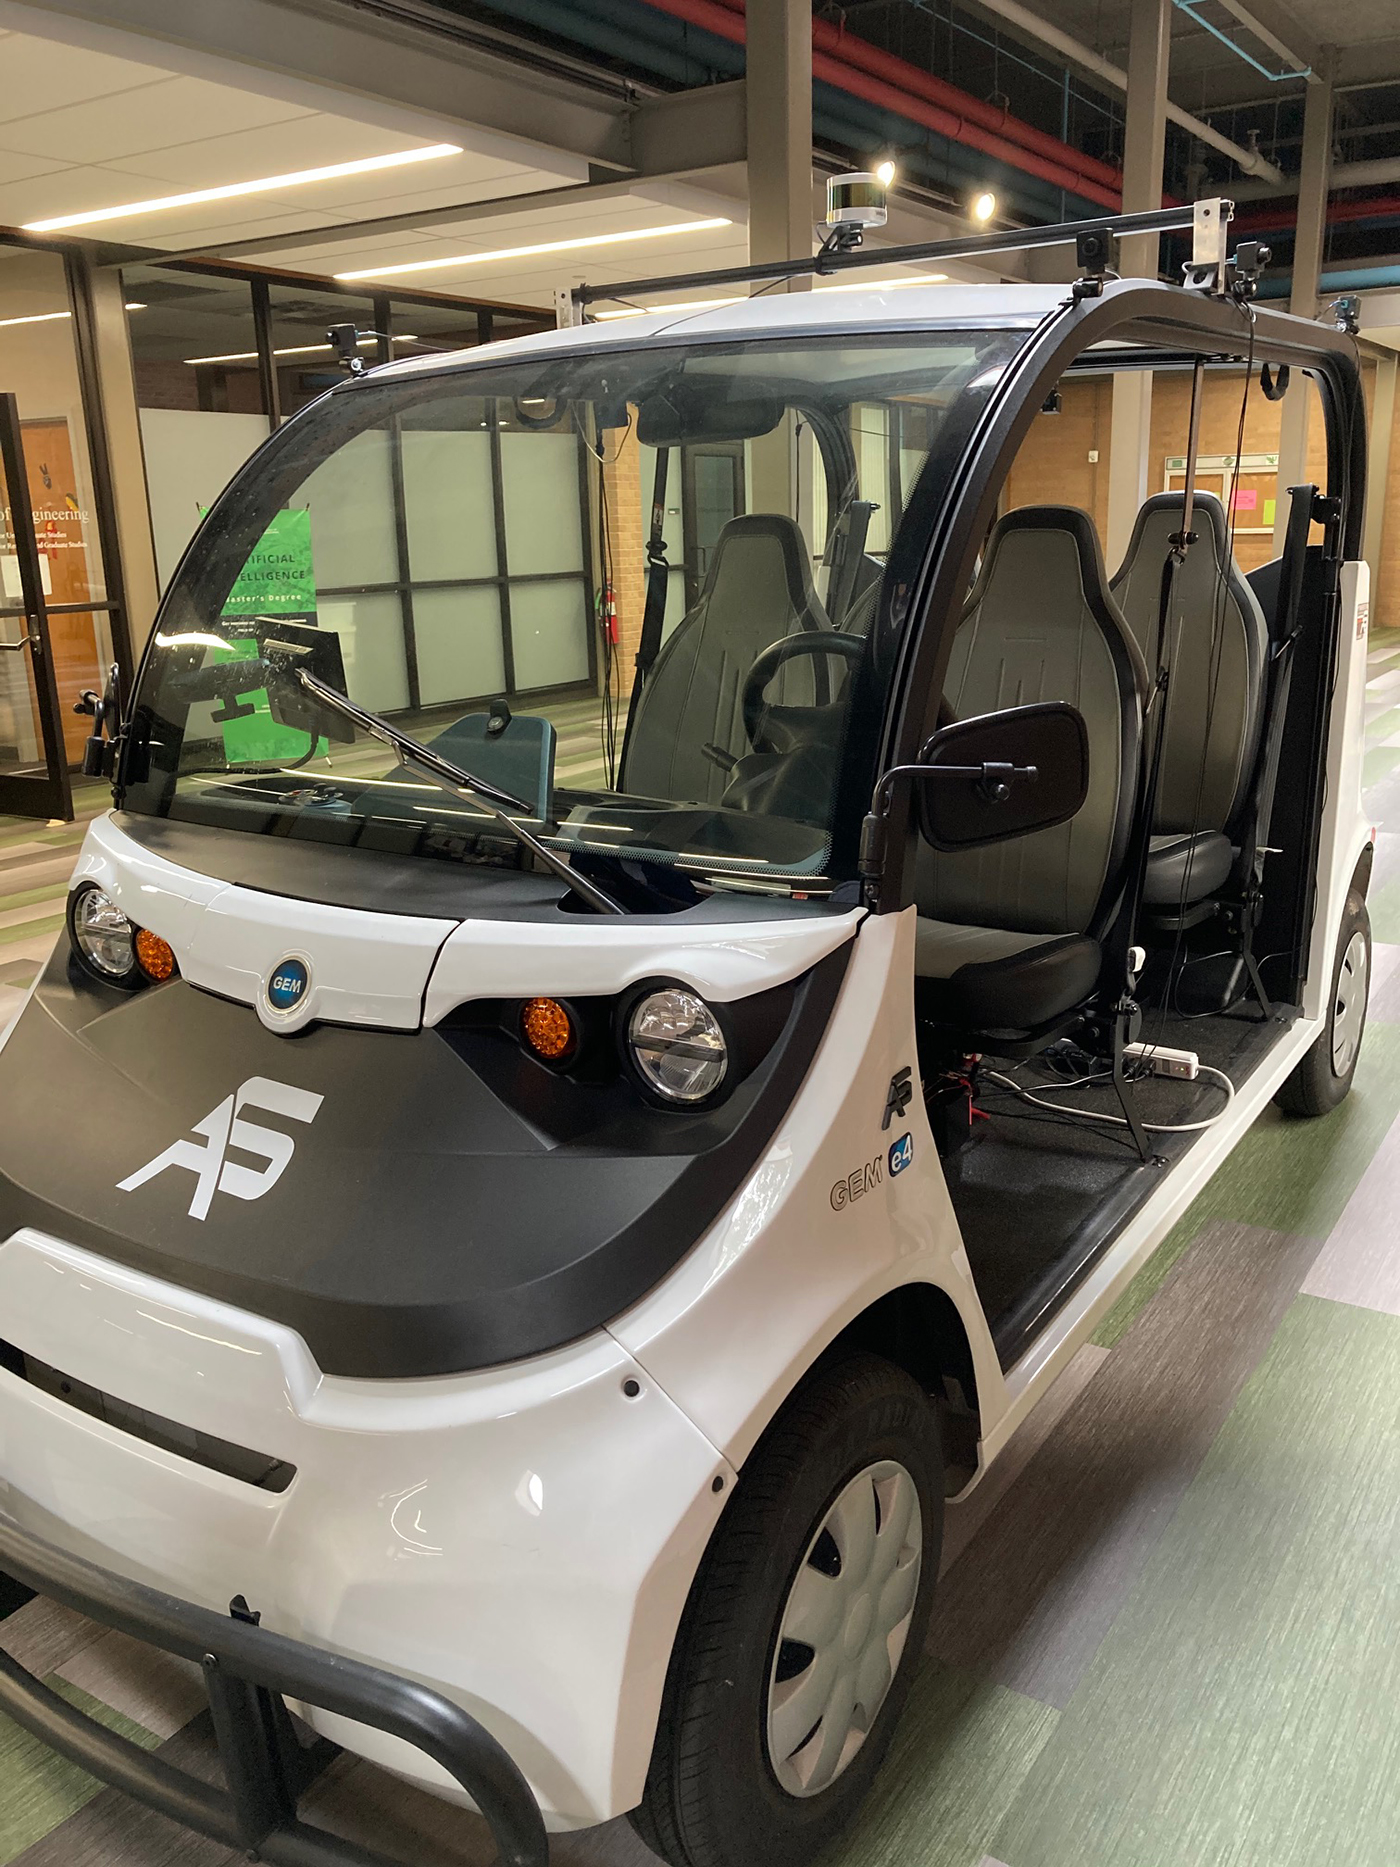 Front angle of autonomous vehicle in Research Park building